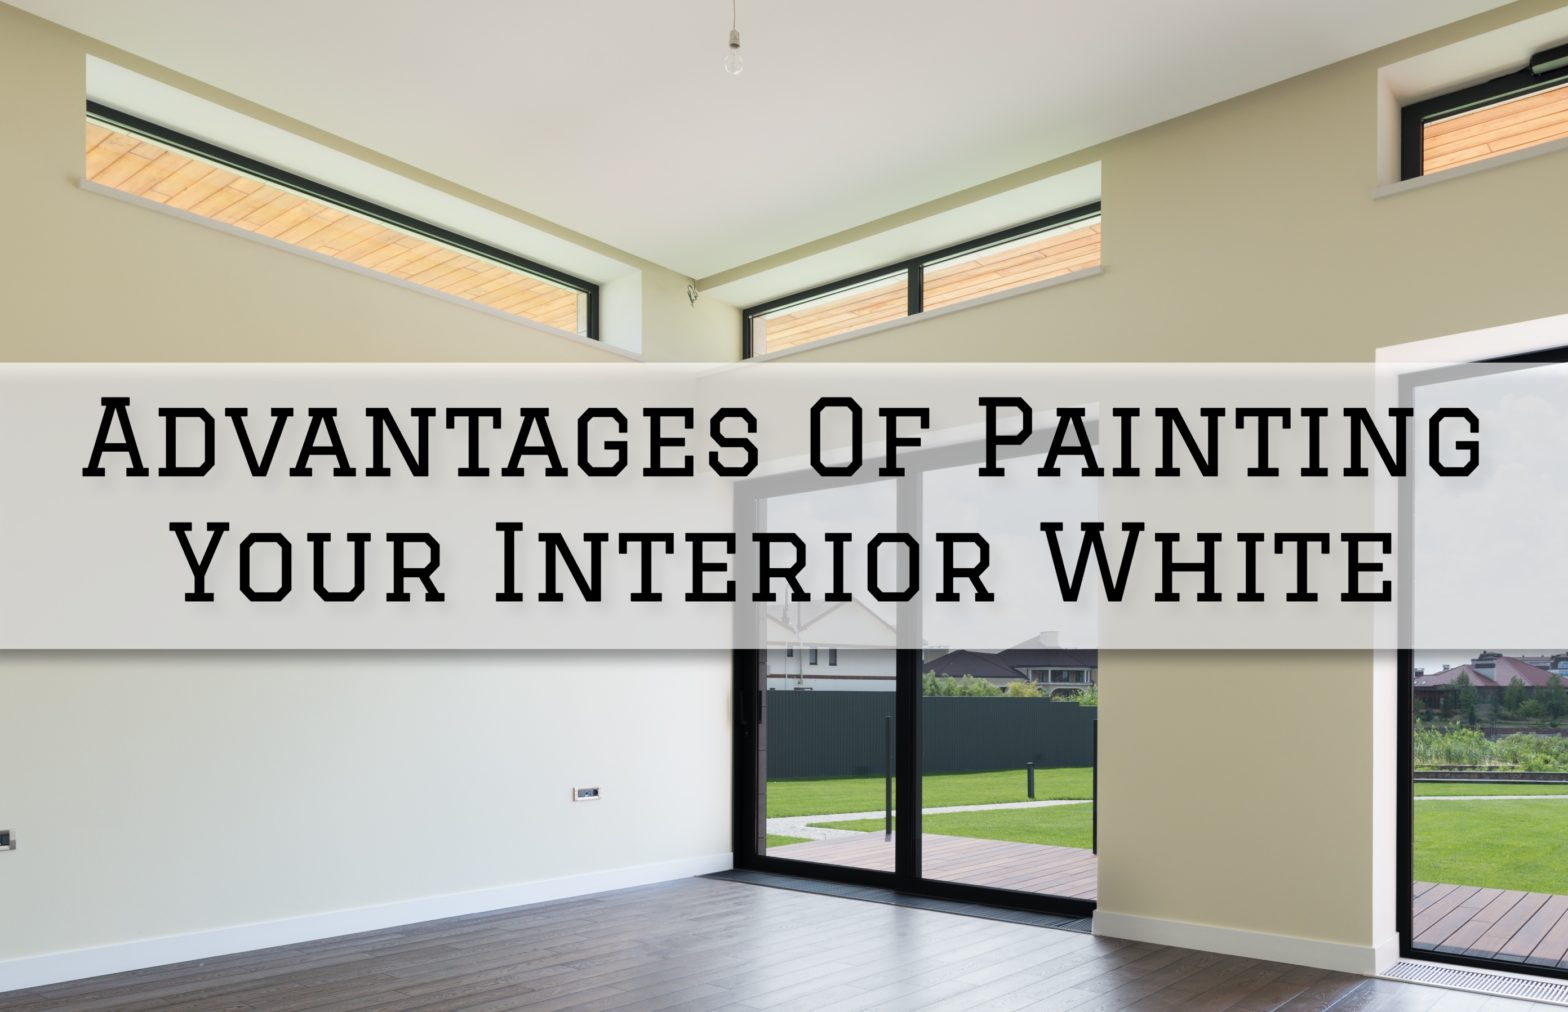 2022-07-15 Painting and Wallpapering Inc Burlington Ontario Advantages Of Painting Interior White